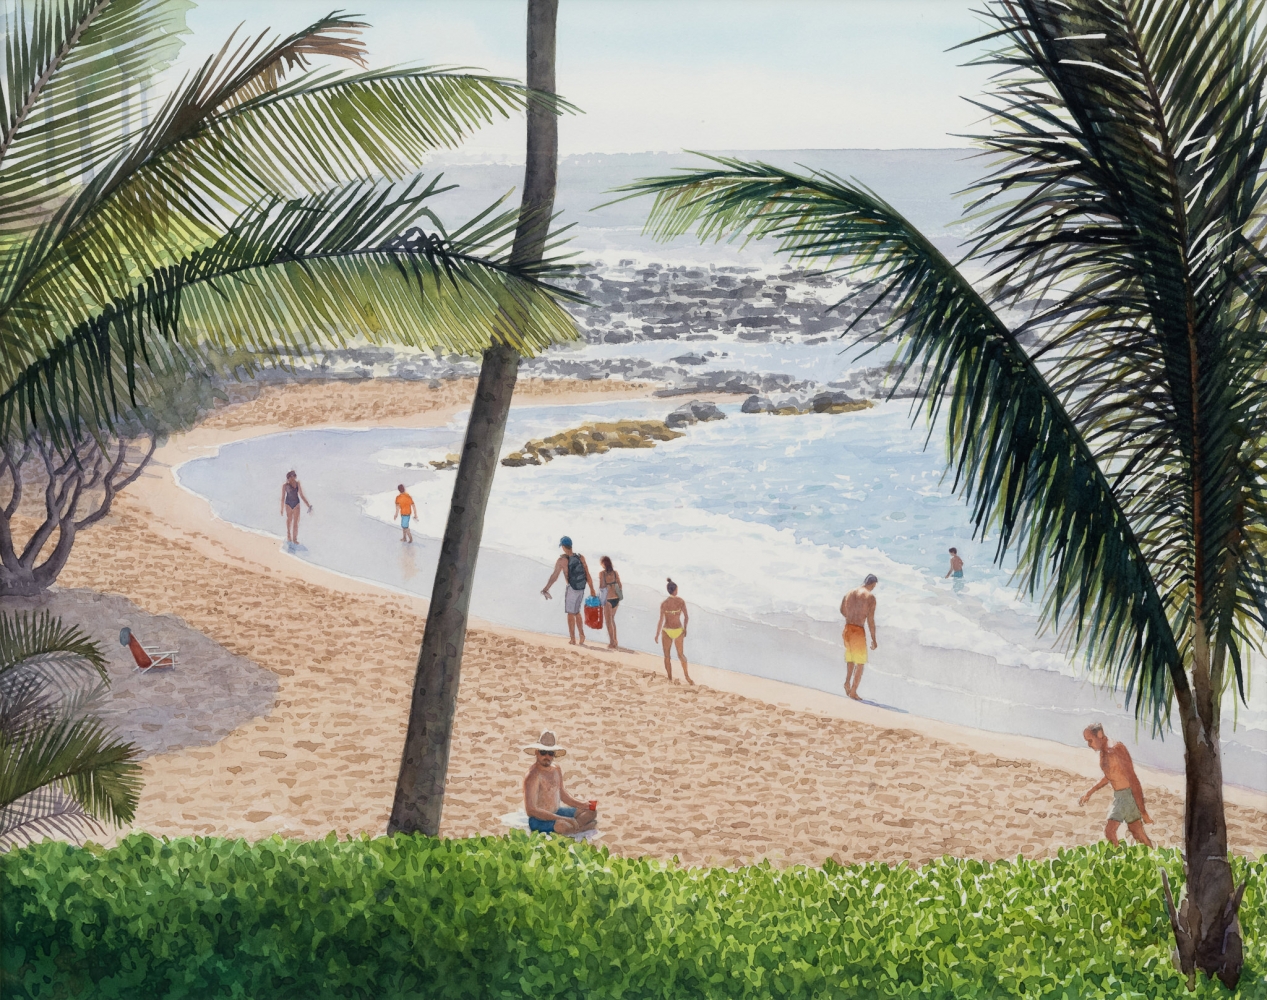 Tim Gardner

Maui Beach Scene

2019

Watercolor on paper

14 1/4 x 18 inches (36.2 x 45.7 cm)

15 1/4 x 19 inches (38.7 x 48.3 cm) paper size

23 3/8 x 26 1/2 inches (59.4 x 67.3 cm) framed

Signed verso

TG 574

&amp;nbsp;

INQUIRE